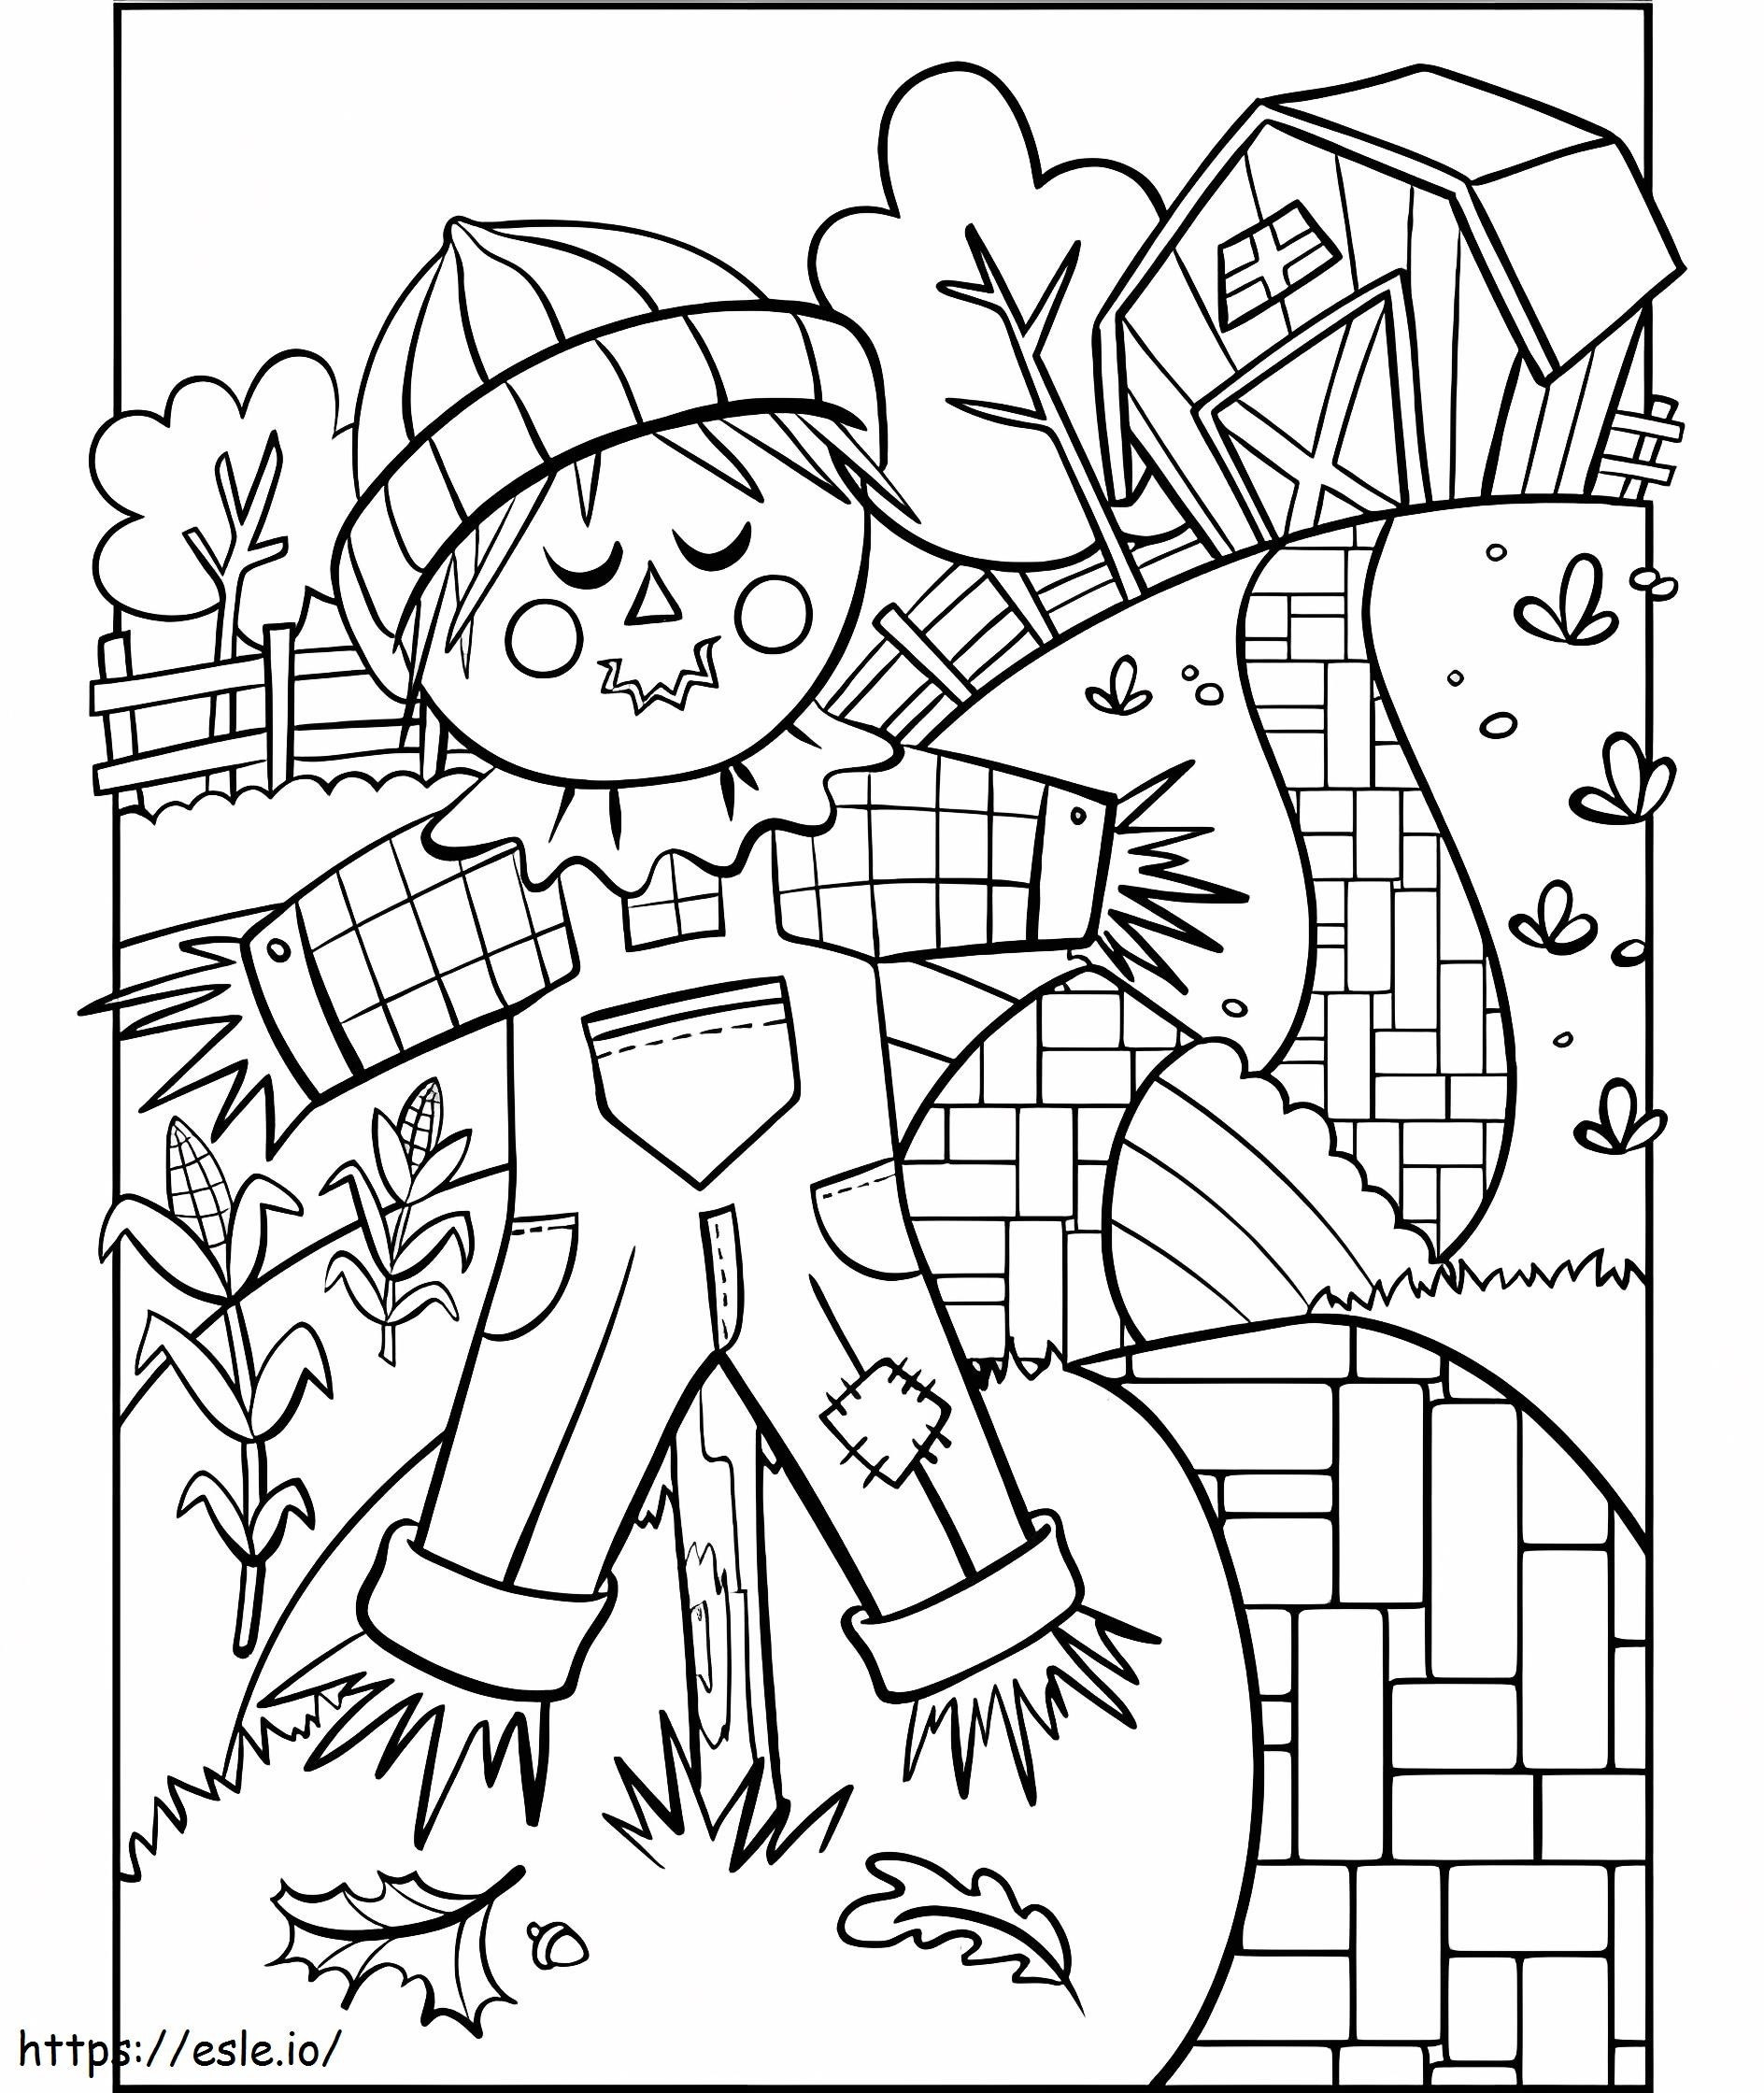 Basic Scarecrow coloring page